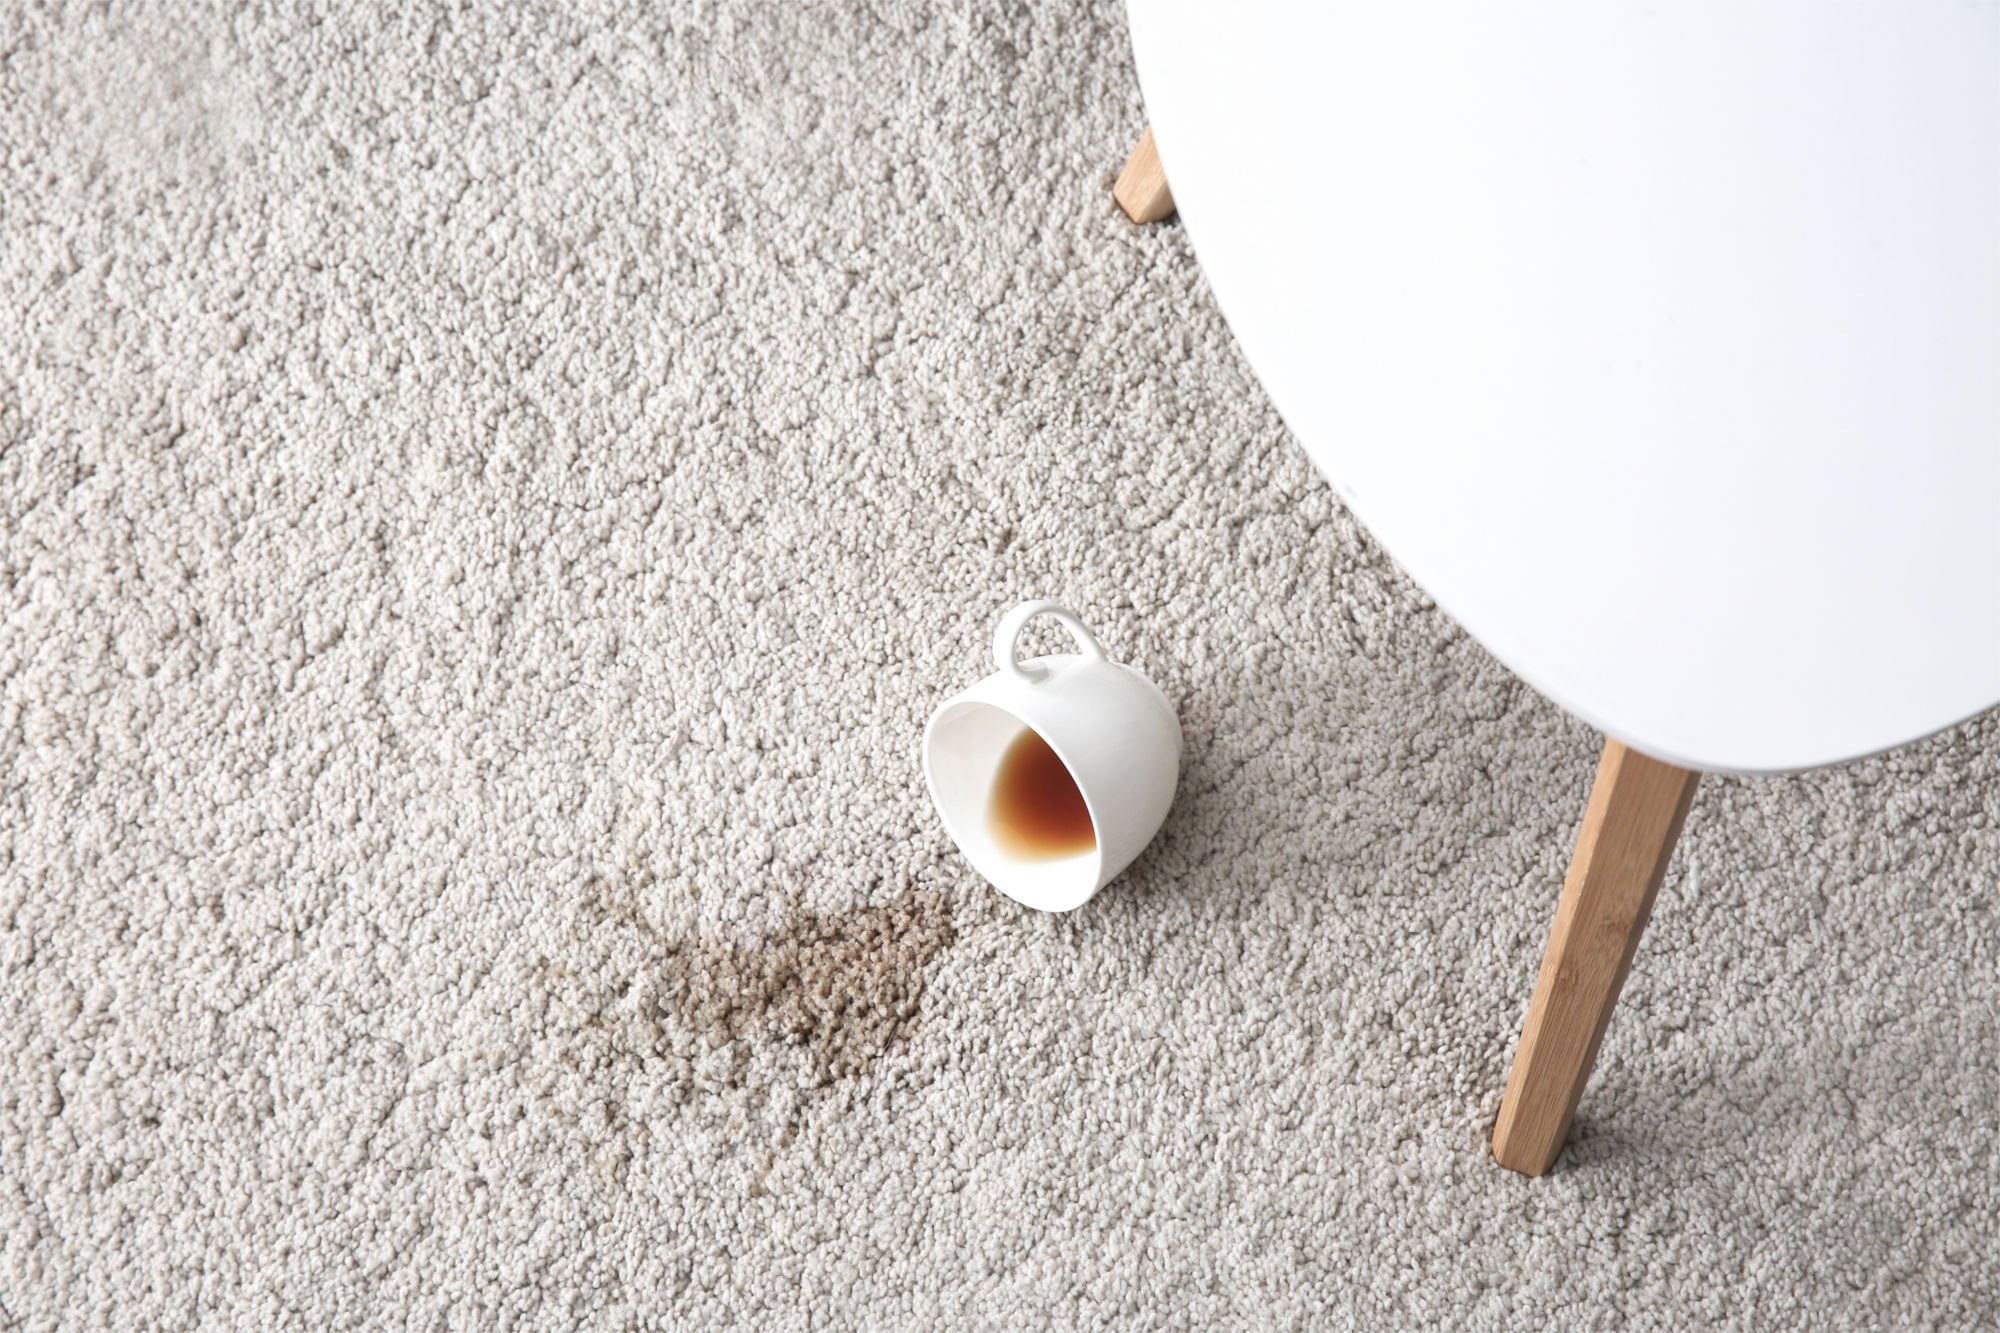 how to remove coffee stains from a carpet